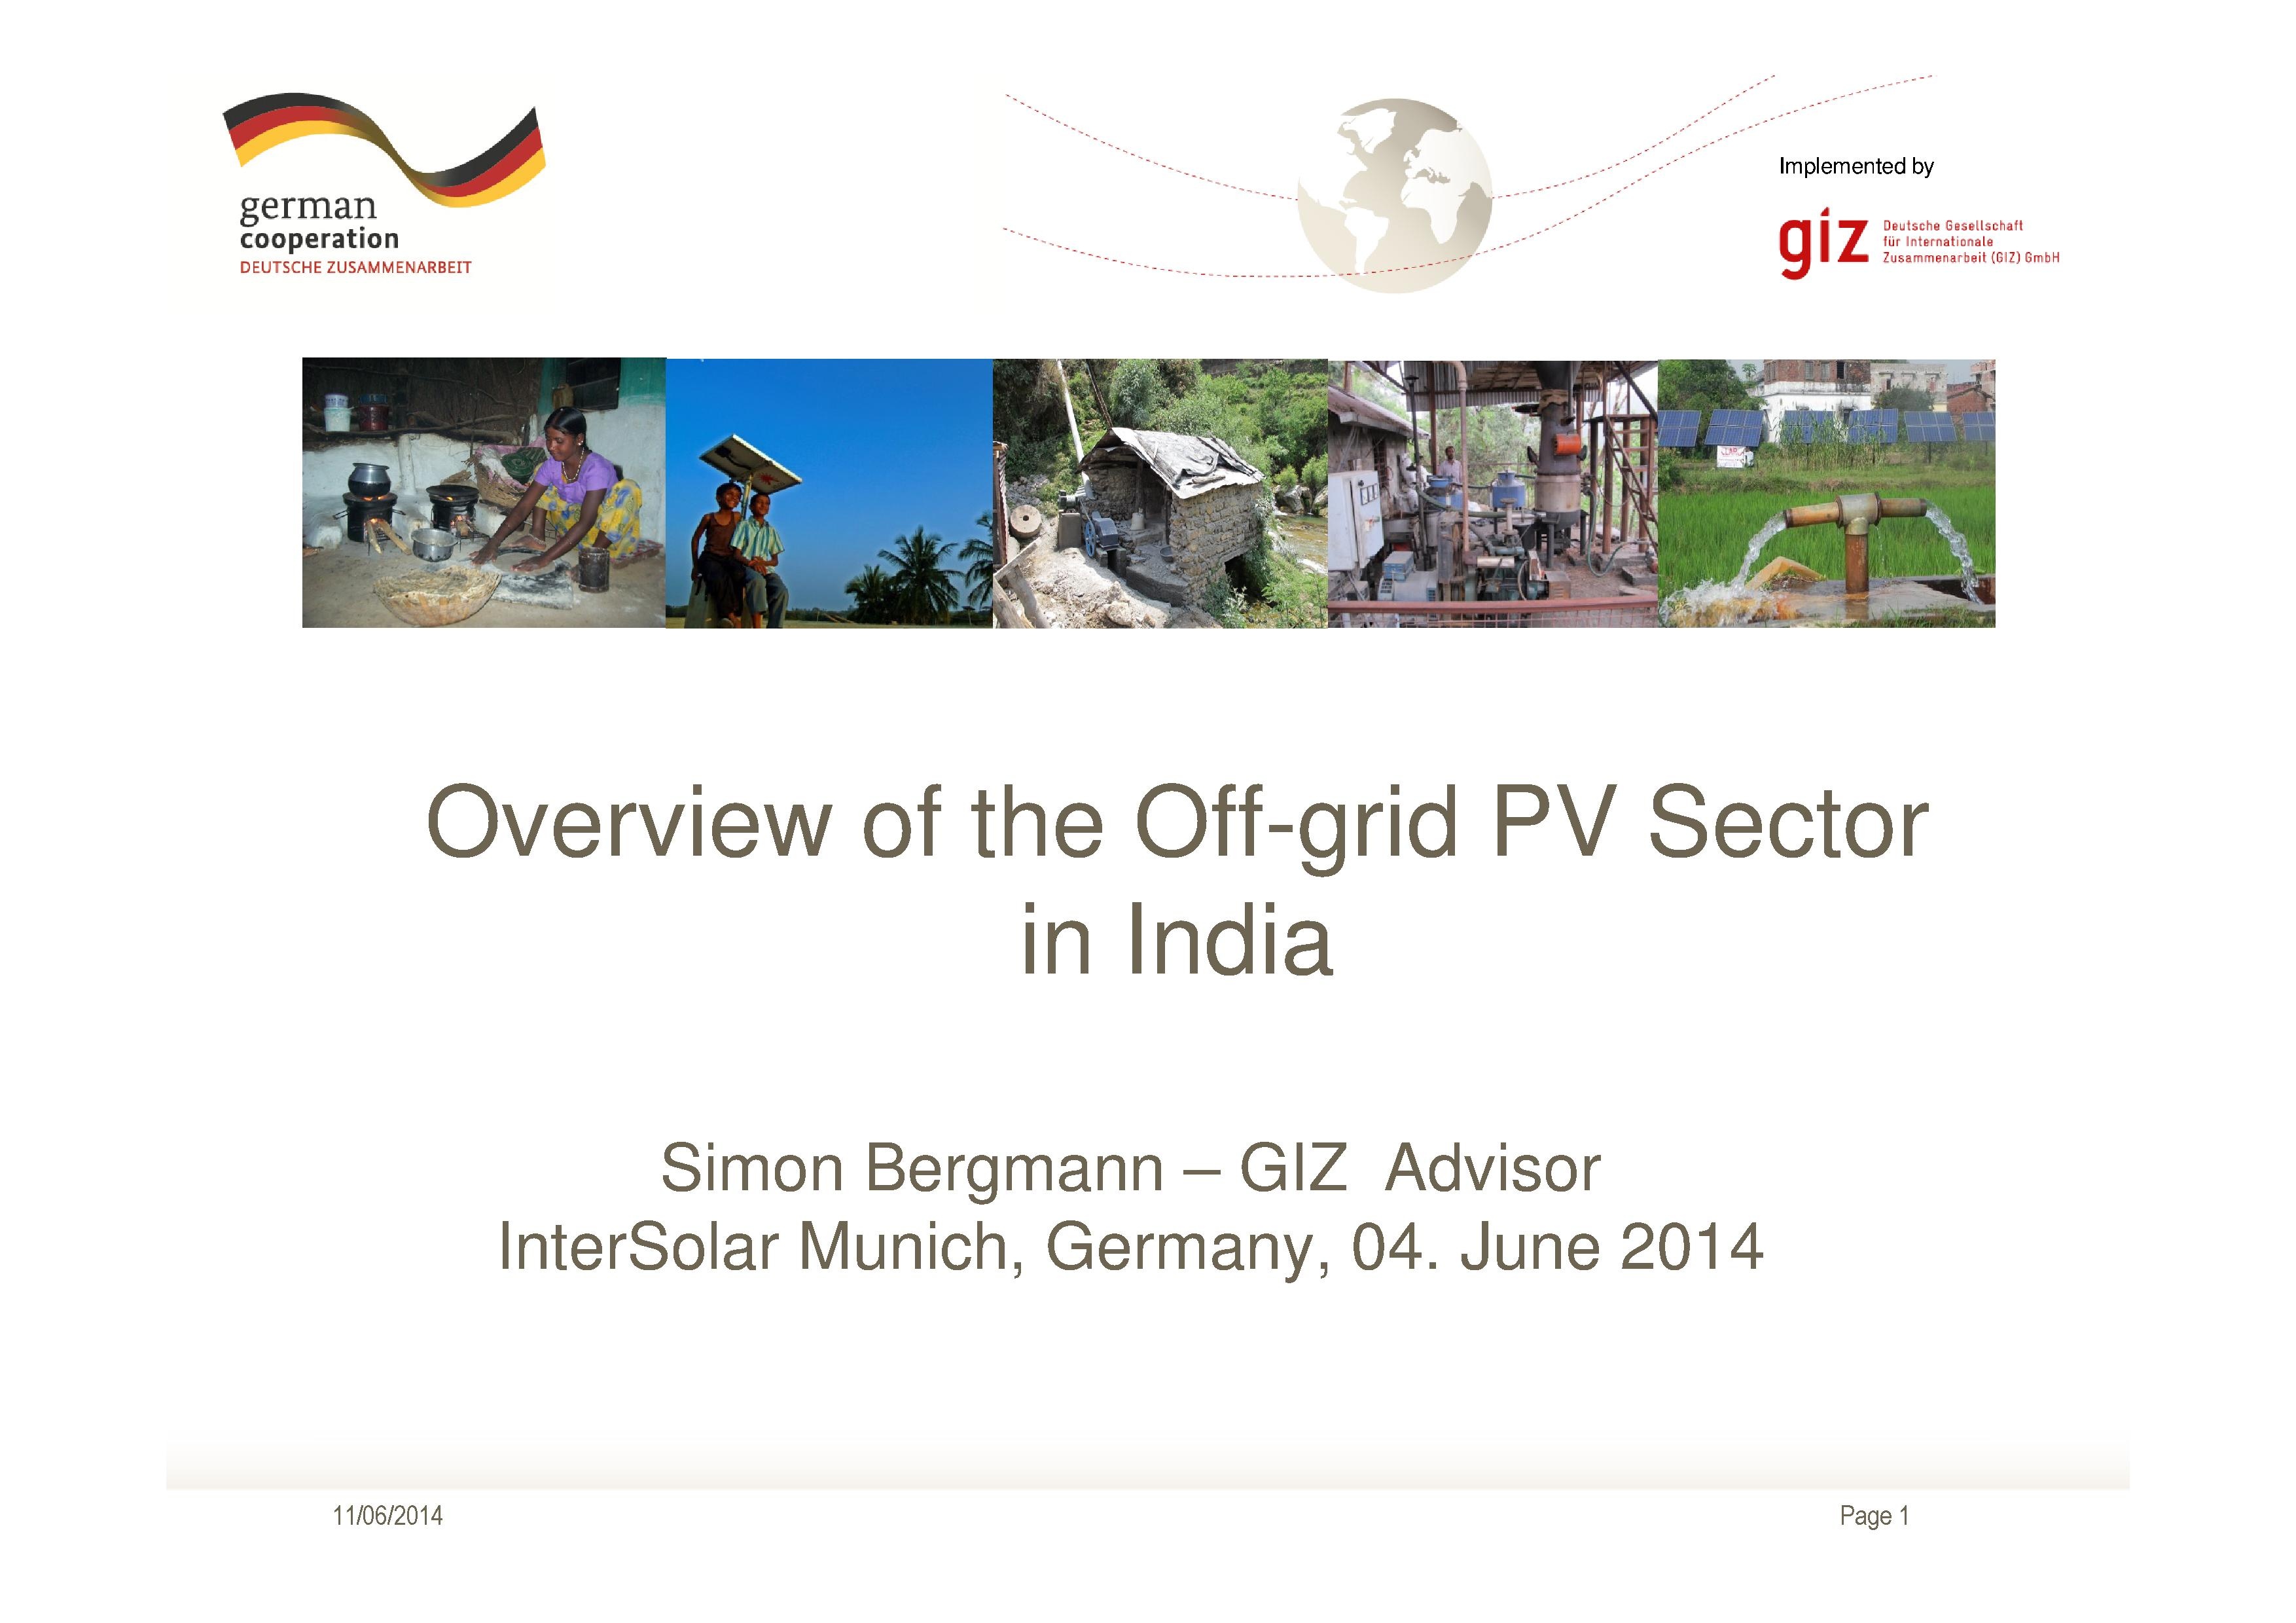 PV Off Grid Market Potential in India